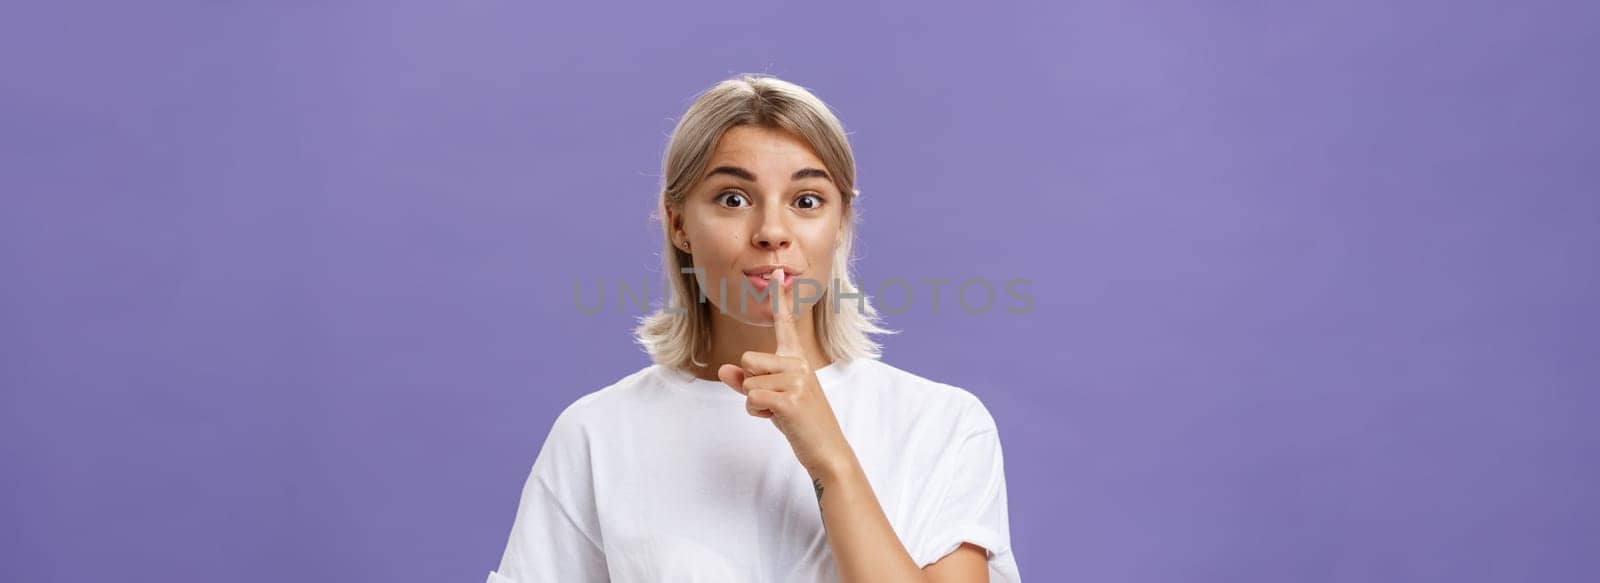 Lifestyle. Charming creative and stylish beautiful tanned girl with fair hair shushing at camera with delighted thrilled look making up great idea wanting hide it and keep secret posing over purple wall.